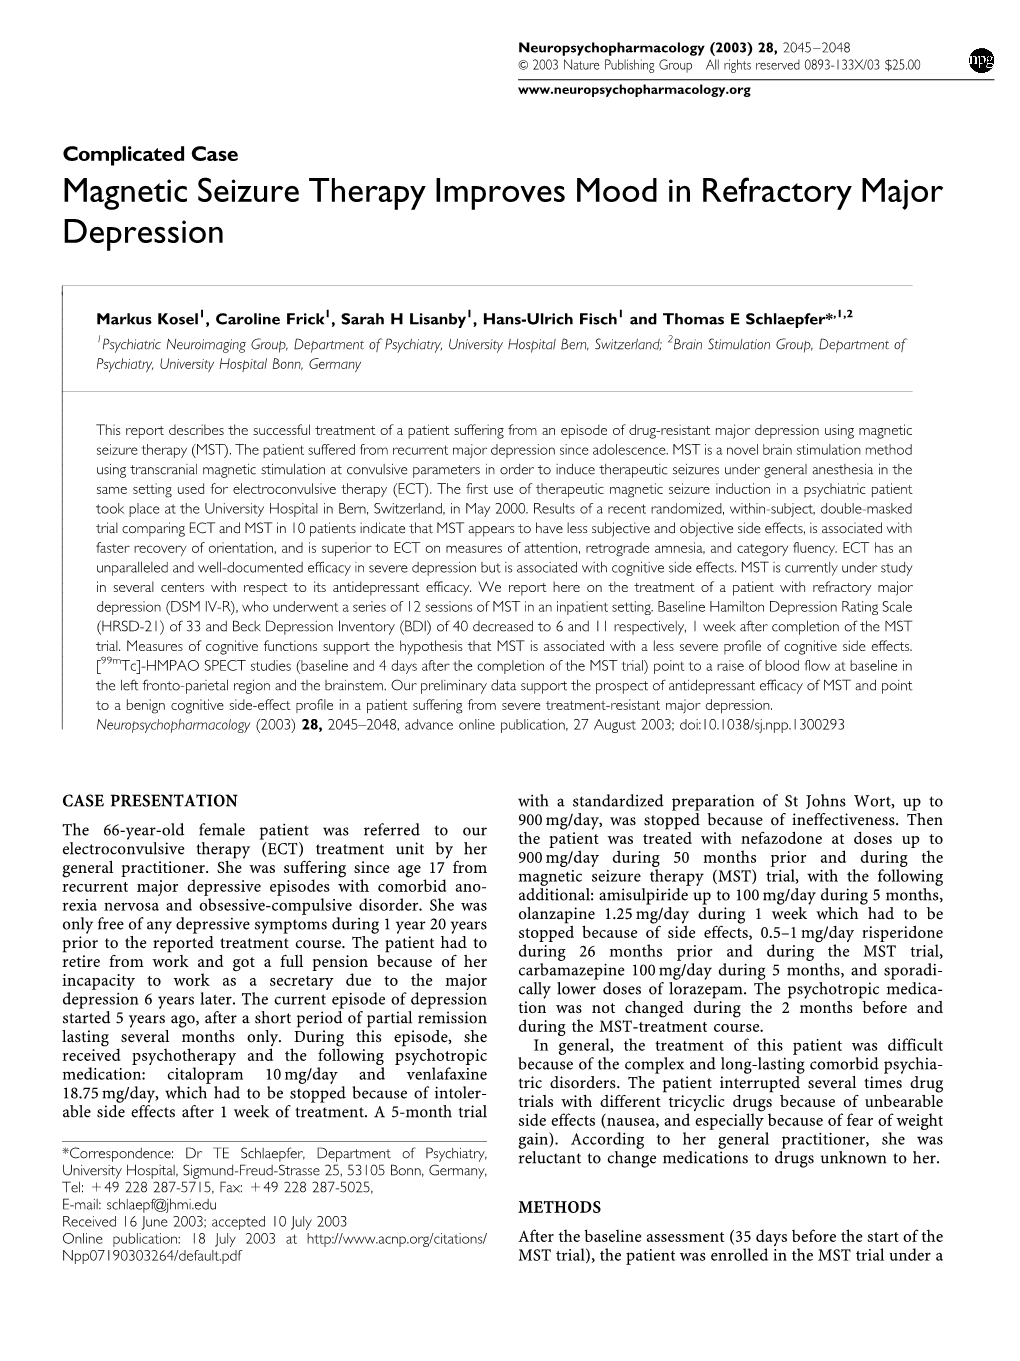 Magnetic Seizure Therapy Improves Mood in Refractory Major Depression